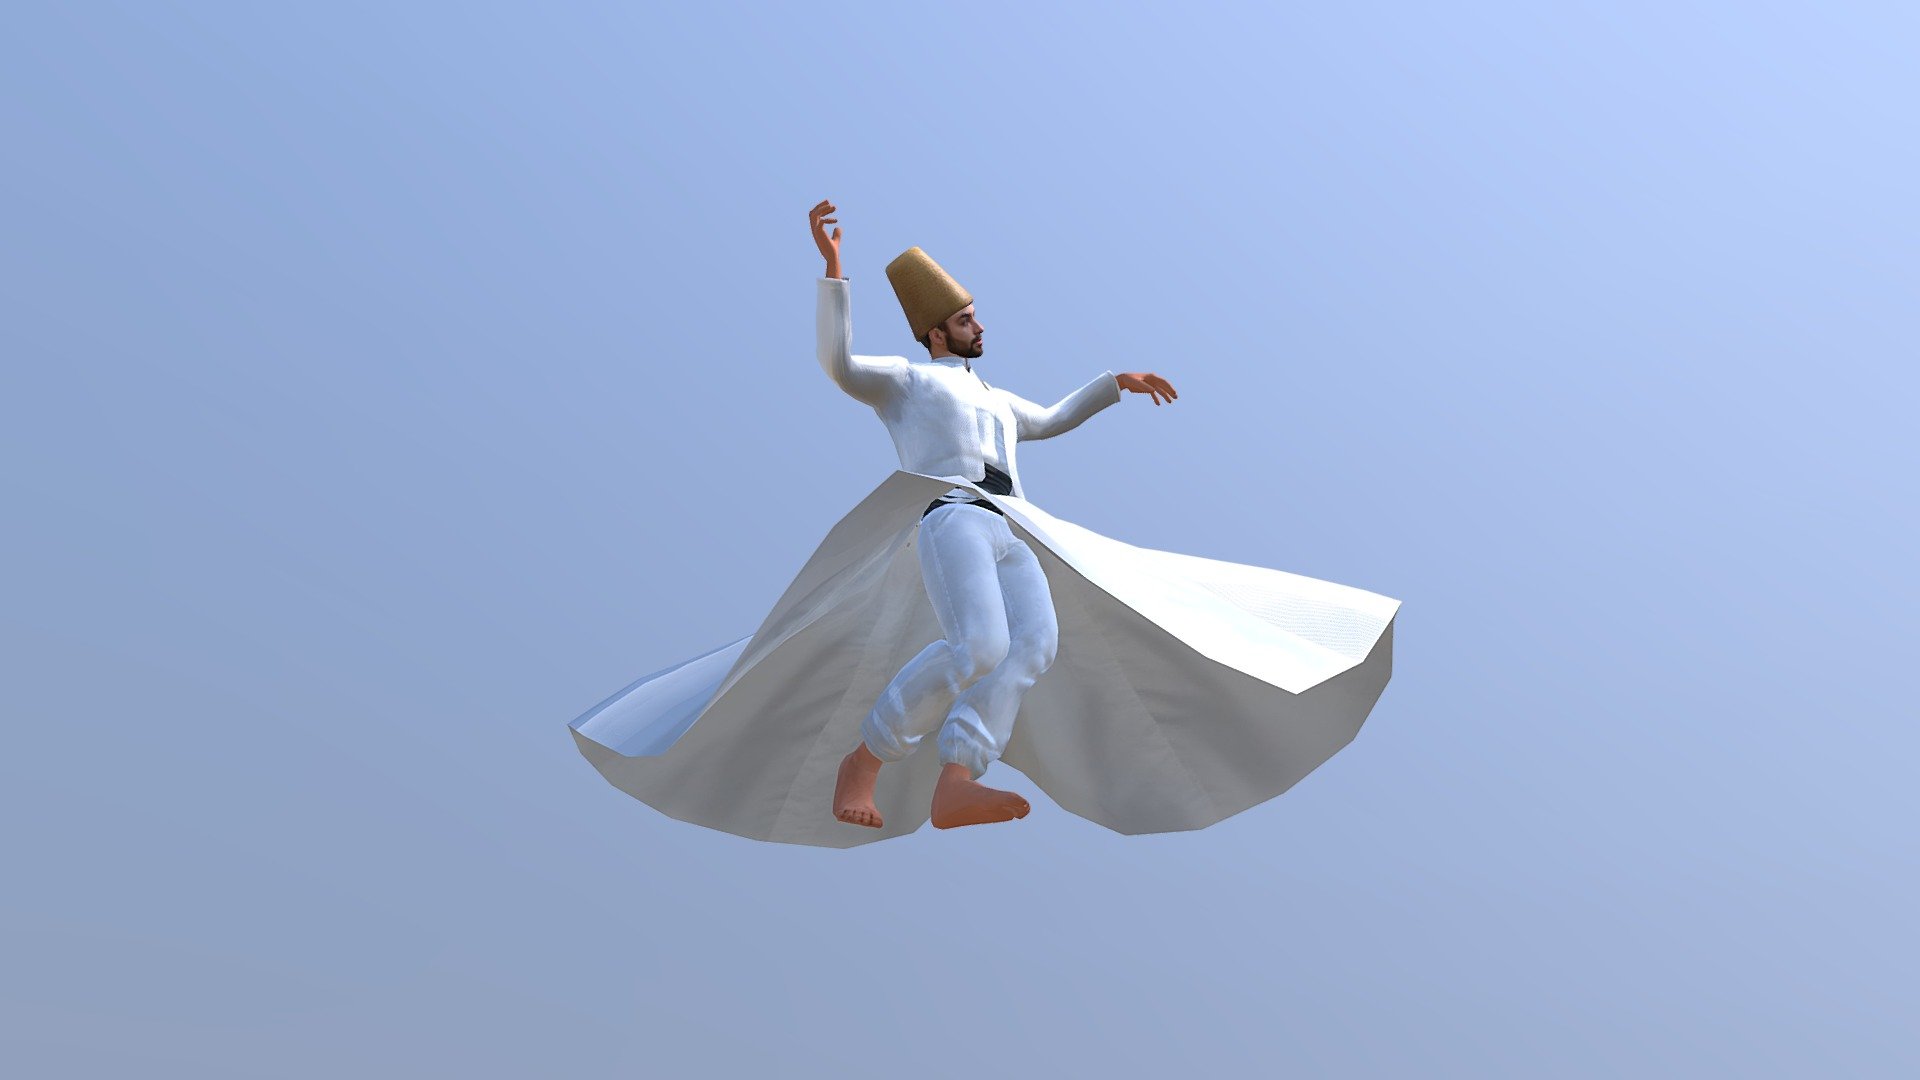 3D model Turkish Dervish. The model is mobile, animated, dancing, circling. The model is optimized for AR - 3D model Turkish Dervish - 3D model by FreegenGO! (@FreegenGroup) 3d model